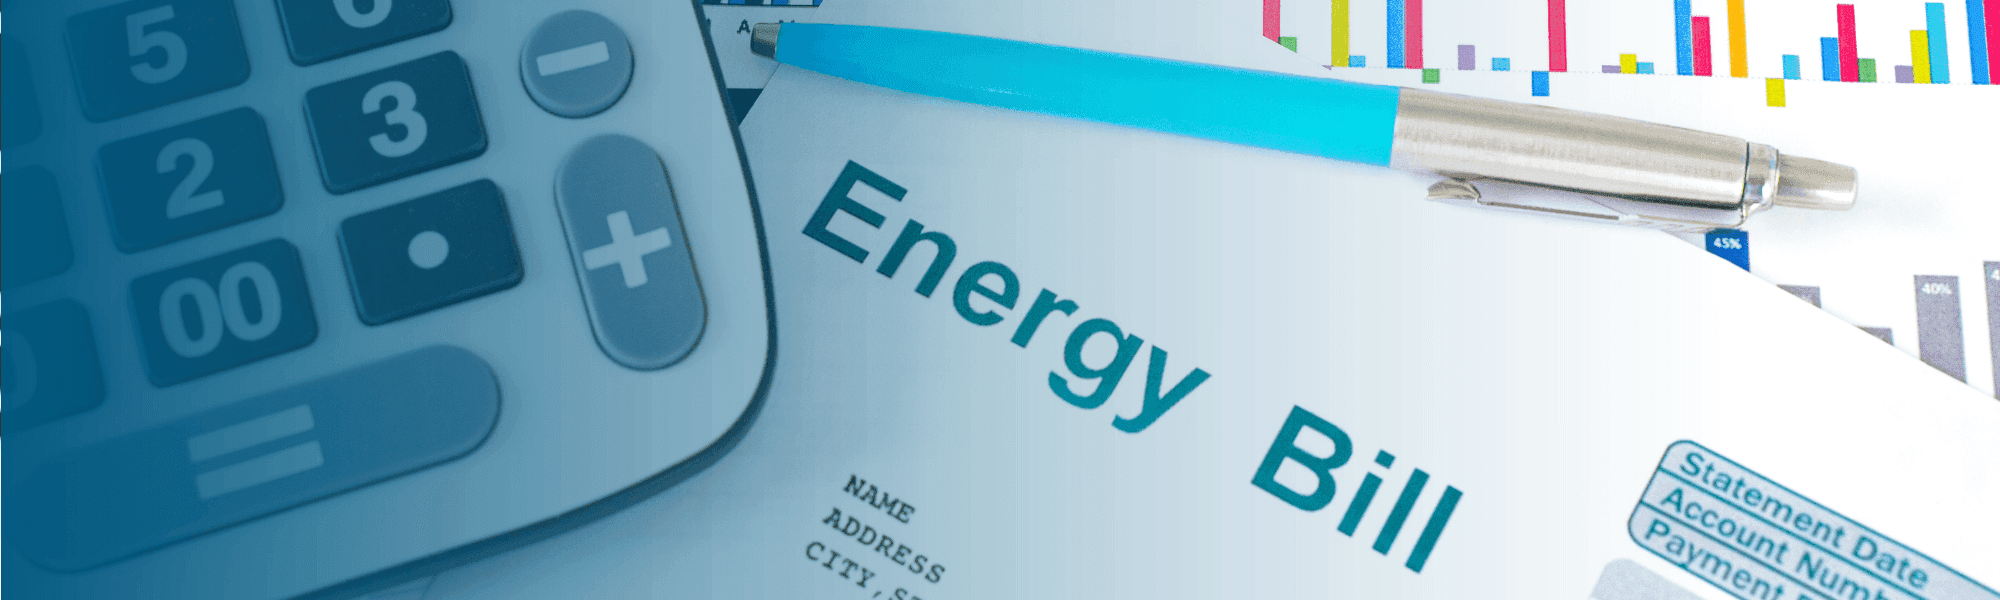 How to Save Energy in Your Home